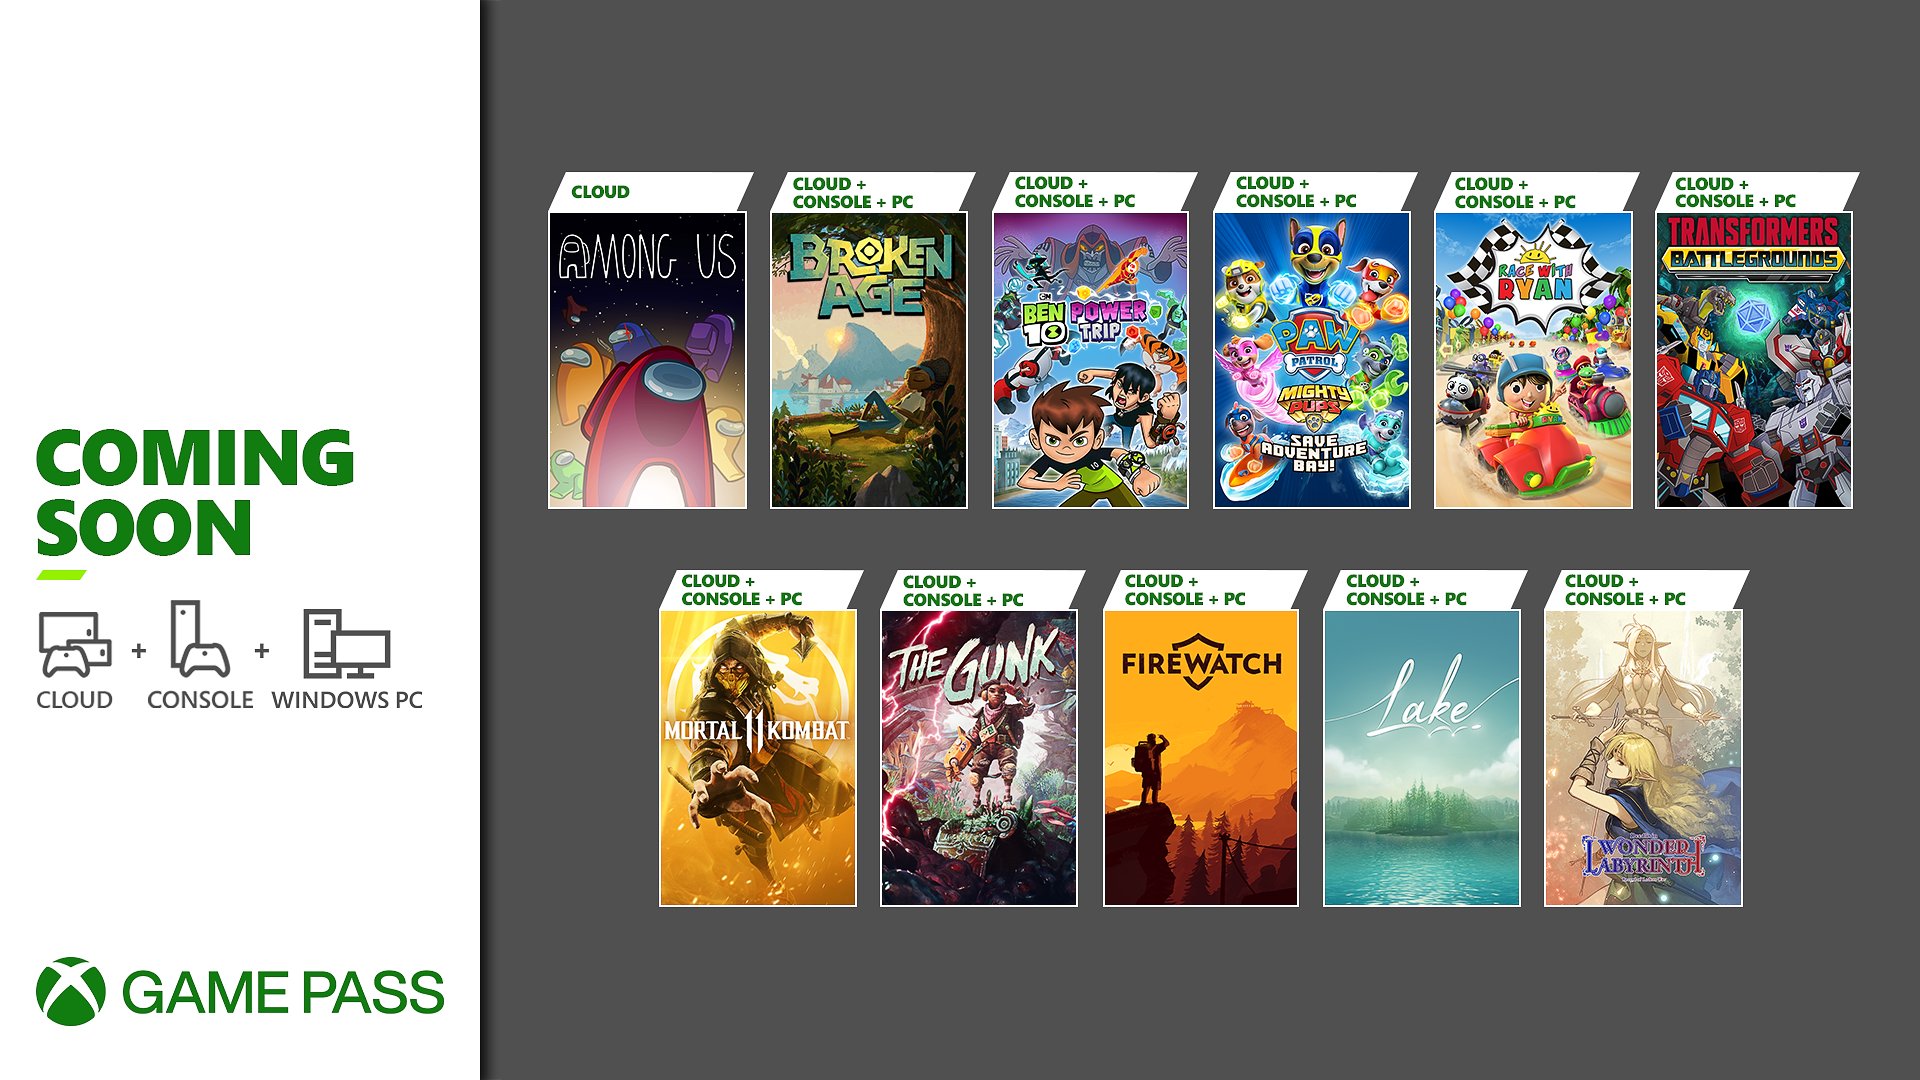 Among Us, Broken Age, Ben 10: Power Trip, Paw Patrol Mighty Pups Save Adventure Bay, Race With Ryan, Transformers Battlegrounds, Mortal Kombat 11, The Gunk, Firewatch, Lake, and Record of Lodoss War: Deedlit in Wonder Labyrinth are coming soon to Xbox Game Pass.